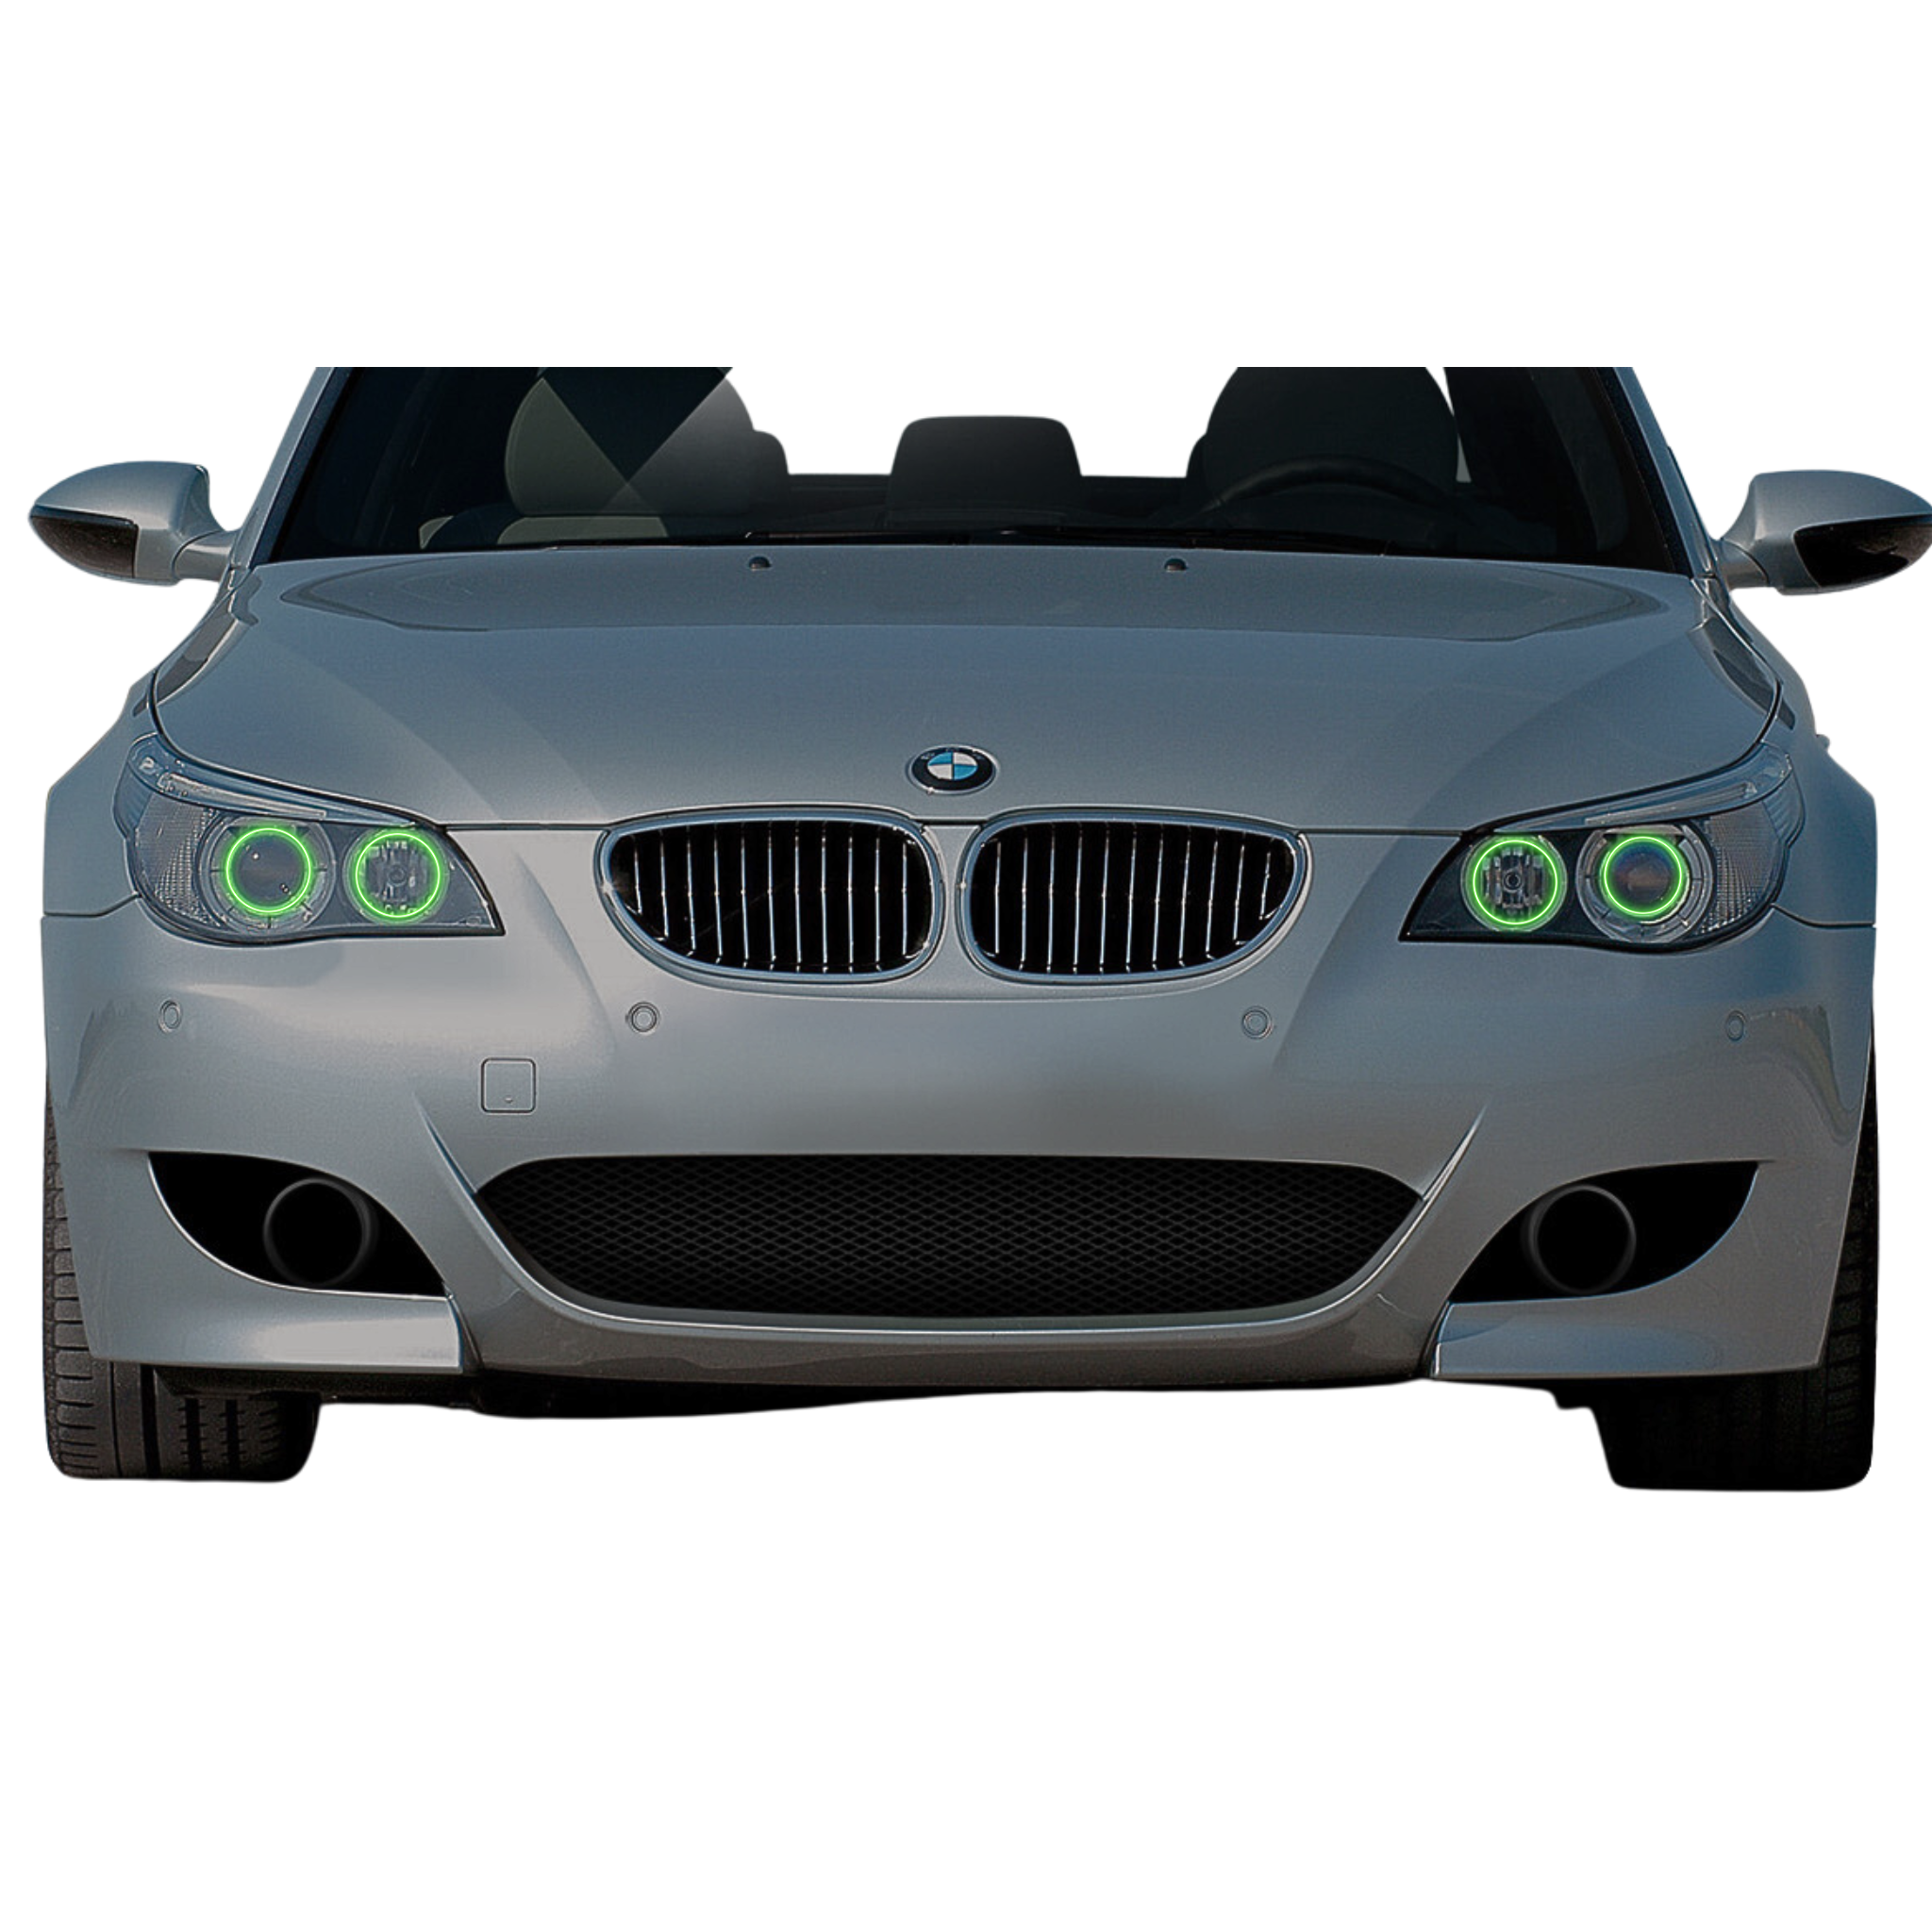 BMW E60 5 series (2003–2010) – Buyers guide & Common problems 